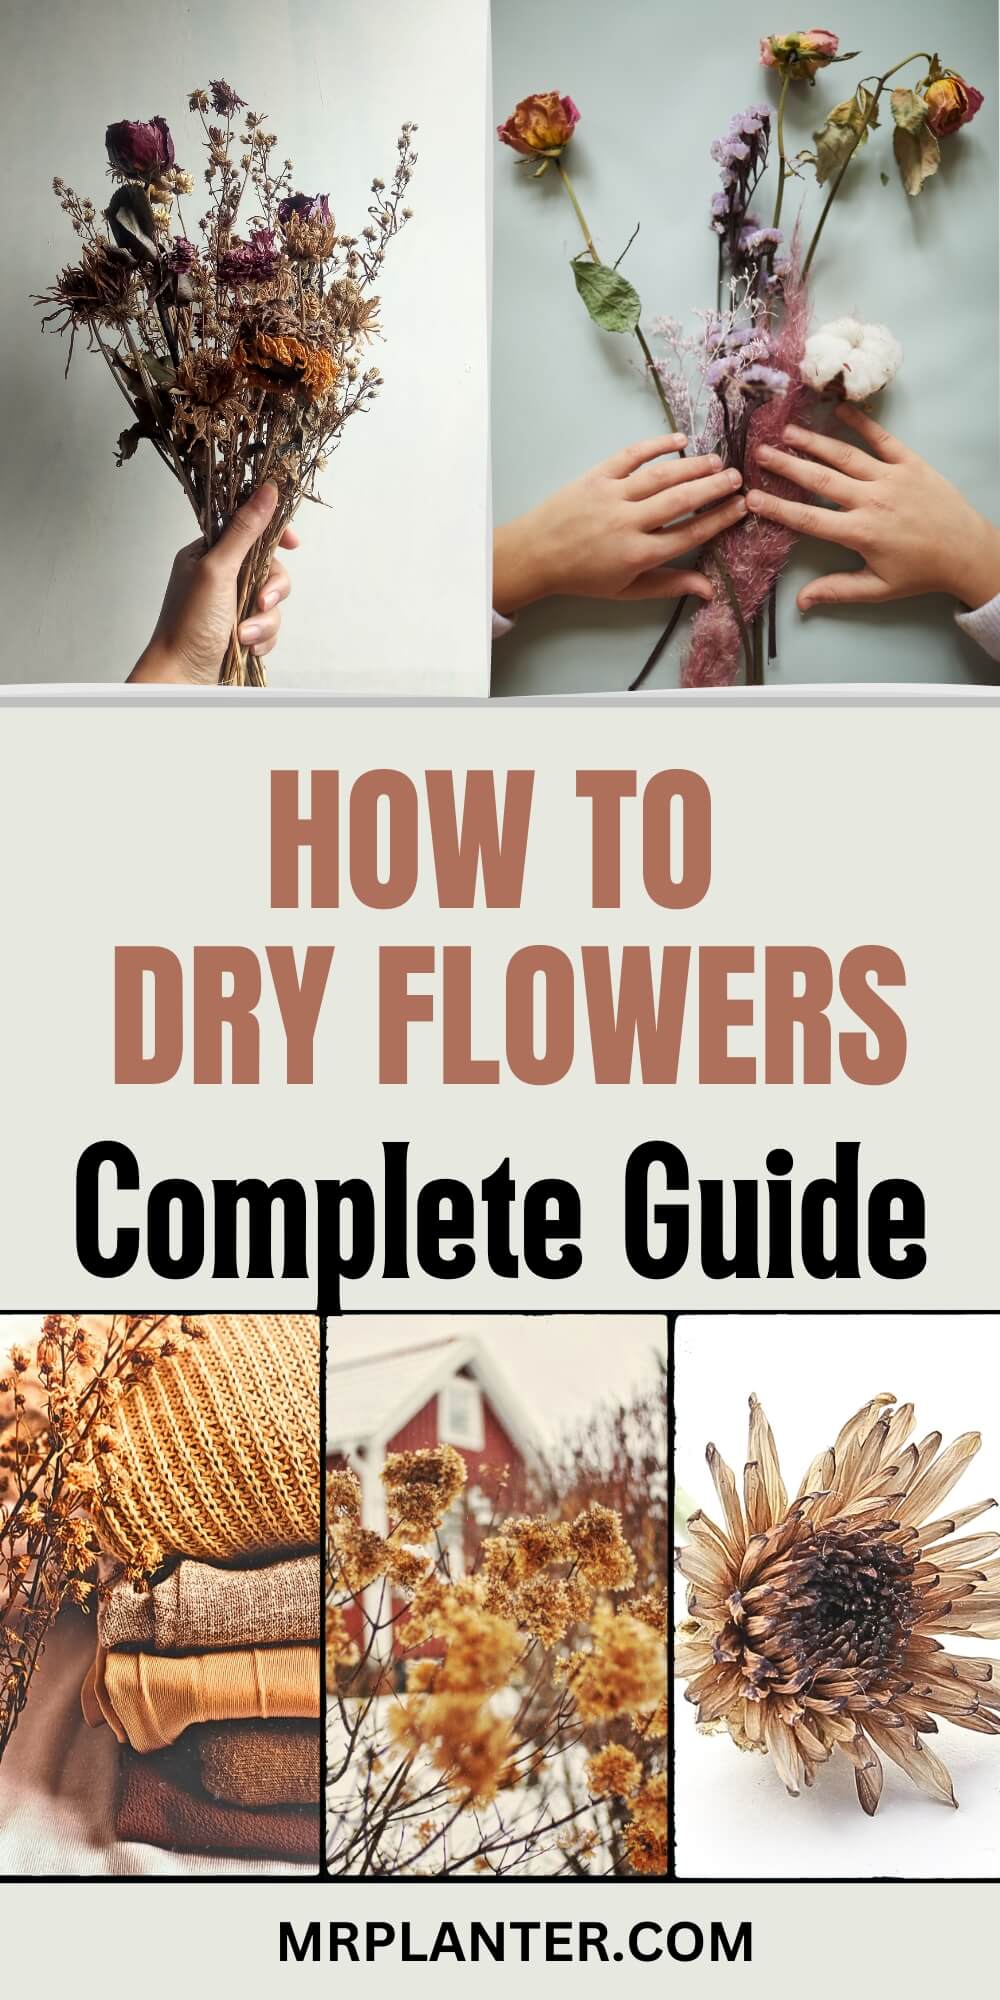 How to Dry Flowers: With Tips and Tricks